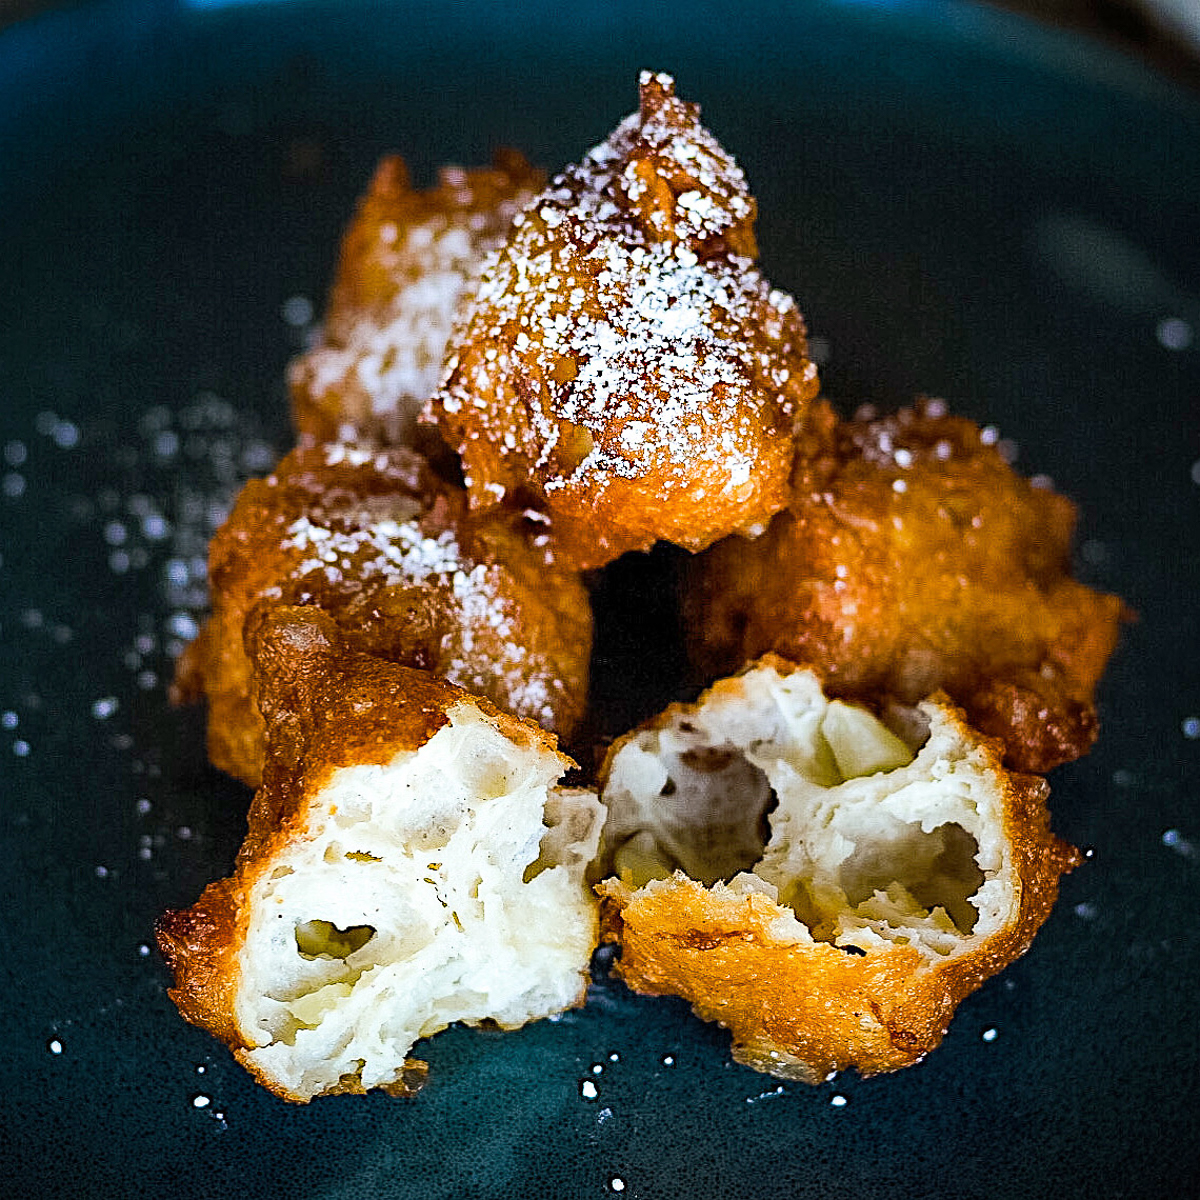 A pile of apple beignets on a dark plate, dusted with icing sugar. One fritter is broken open to show the light, airy inside of the donut.